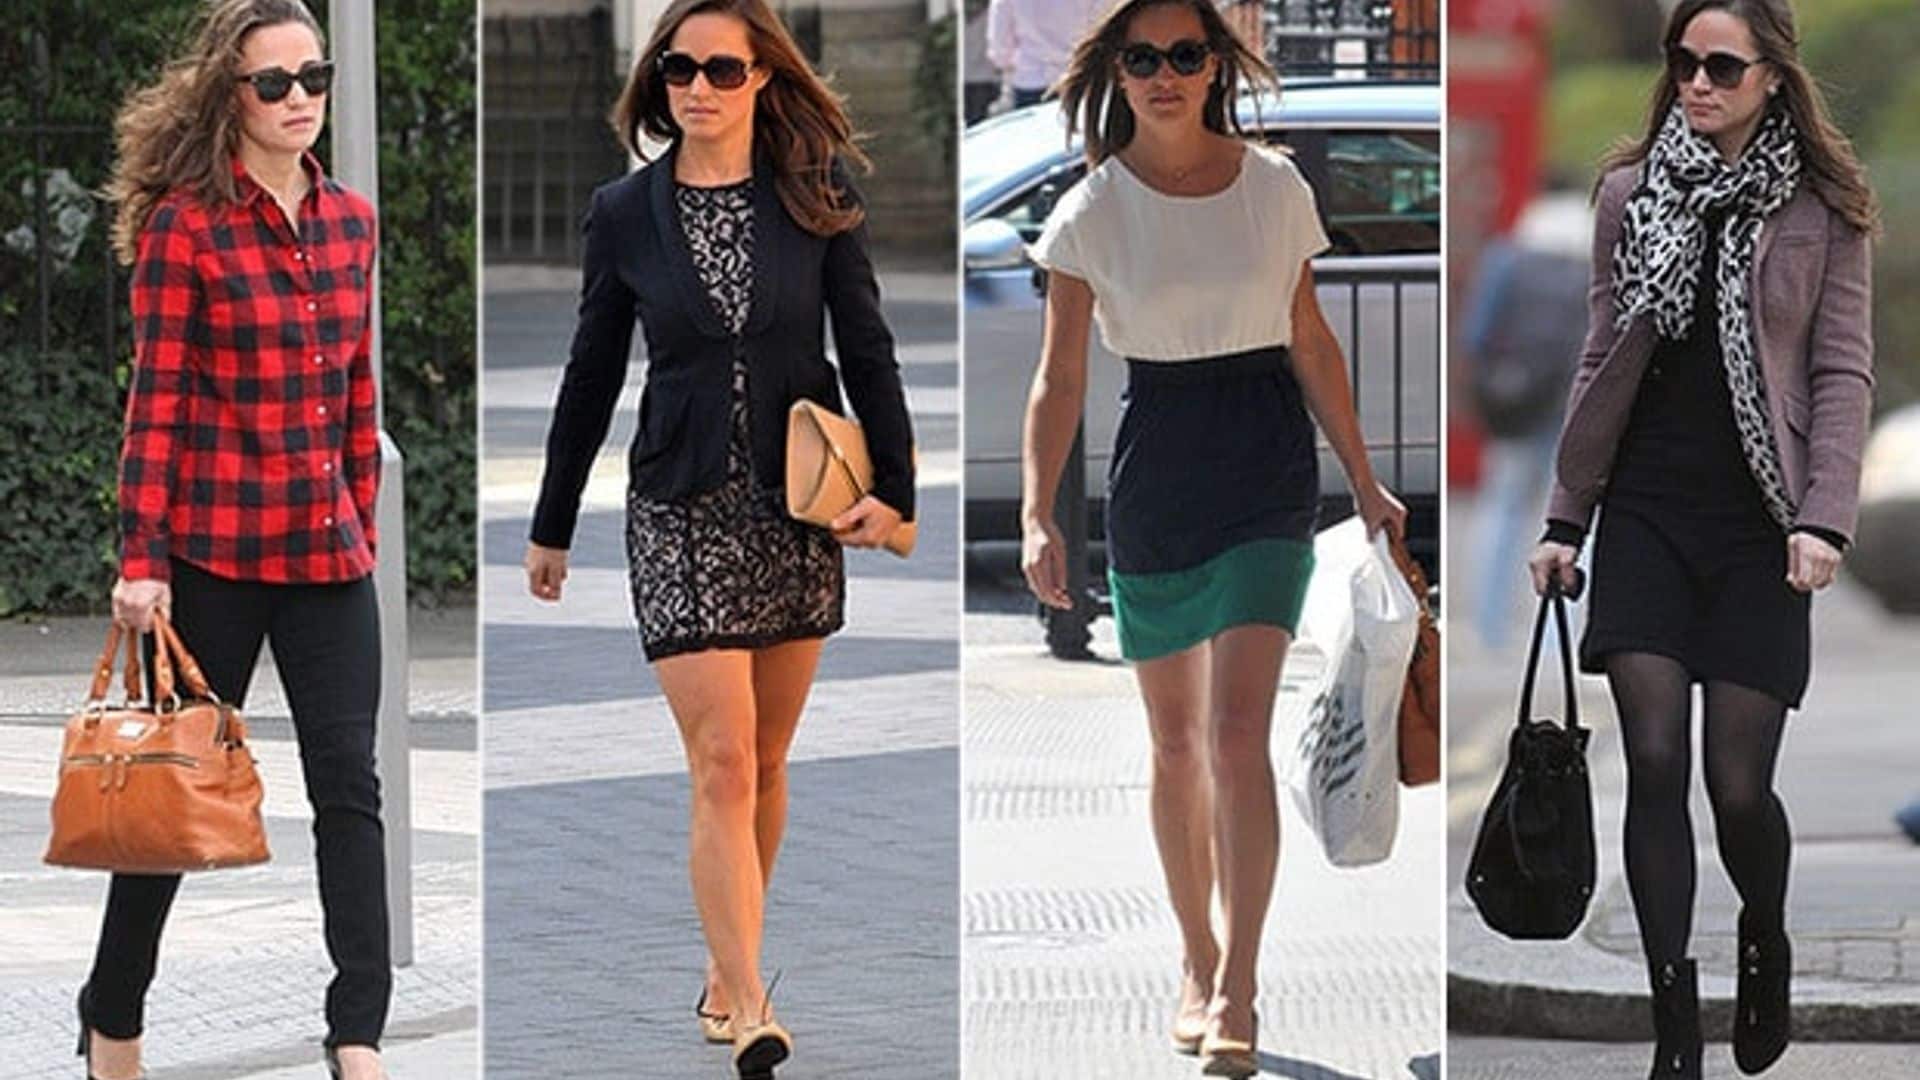 Pippa Middleton has certainly mastered the art of daytime dressing, whether she's courtside at Wimbledon or running errands around London. While older sister Duchess Kate is known for her glamorous gowns and stylish coat-dresses when she's representing the Palace, Pippa has perfected the casual chic ensemble.
<br>
Click through for a gallery of some of her best street style looks.